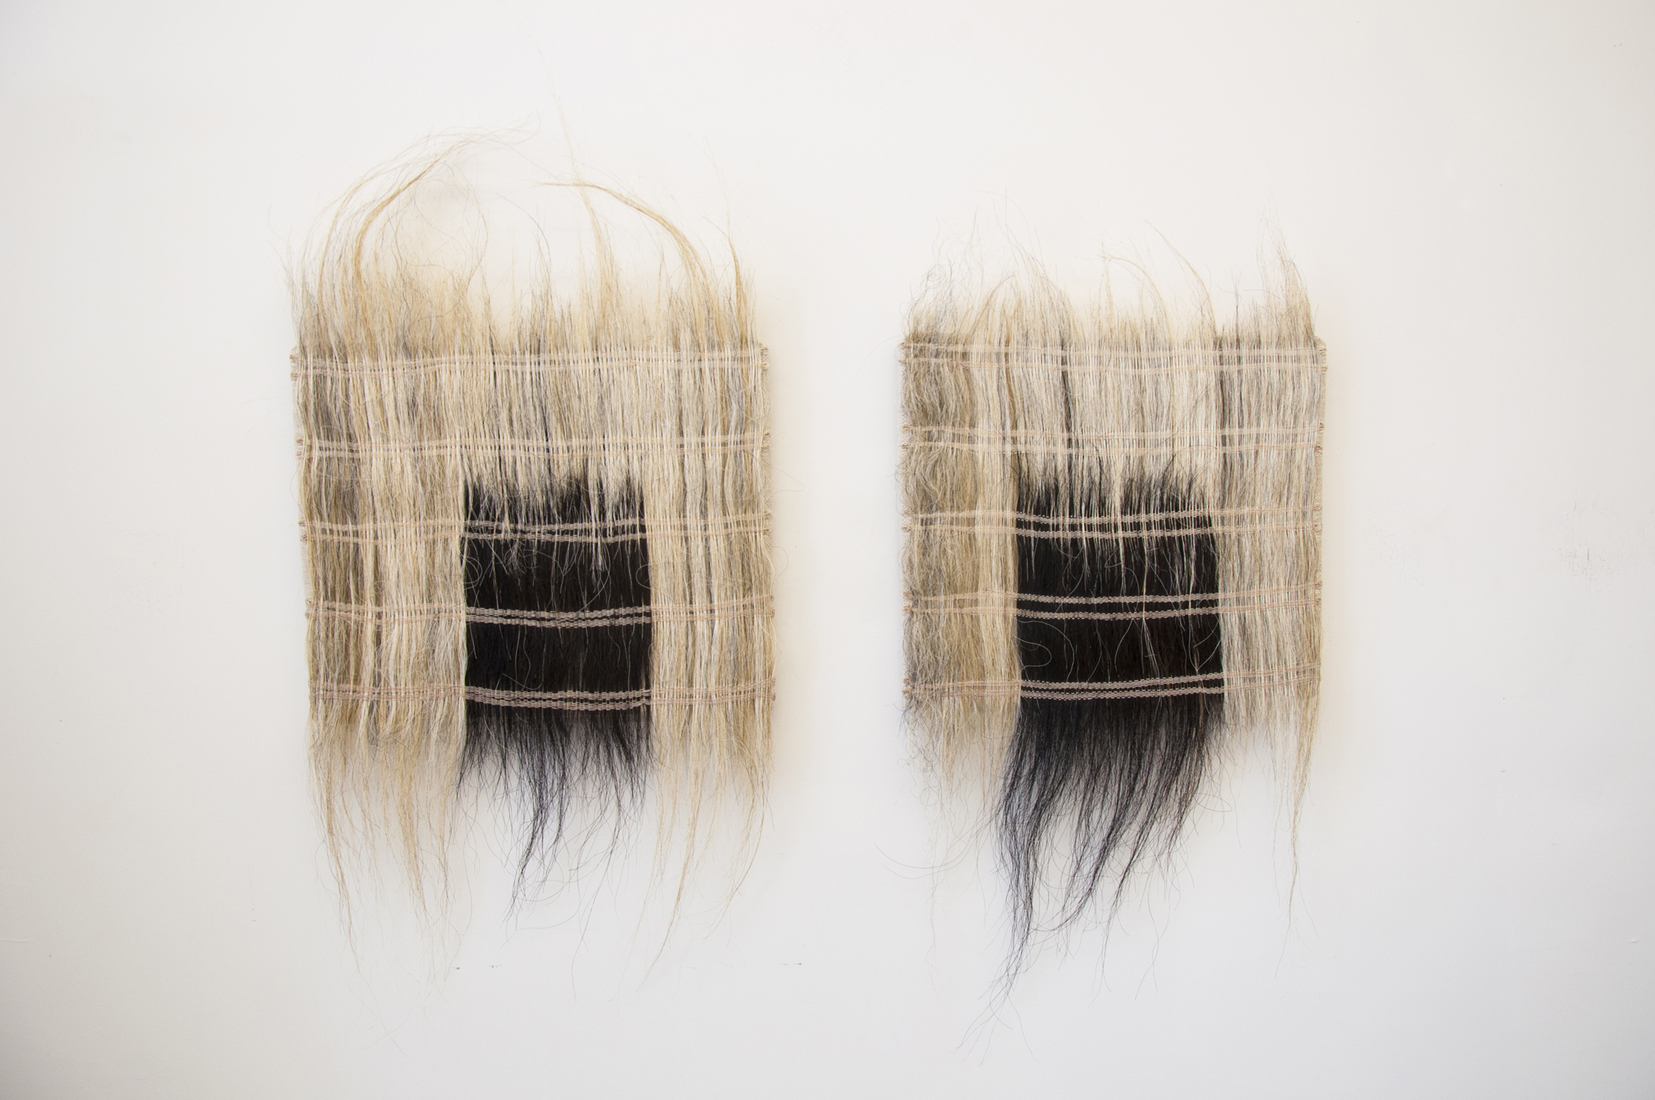 C A T H E R I N E   F A I R B A N K S      Two Chimneys Icelandic horsetail hair and hand dyed thread, mounted on archival linen 